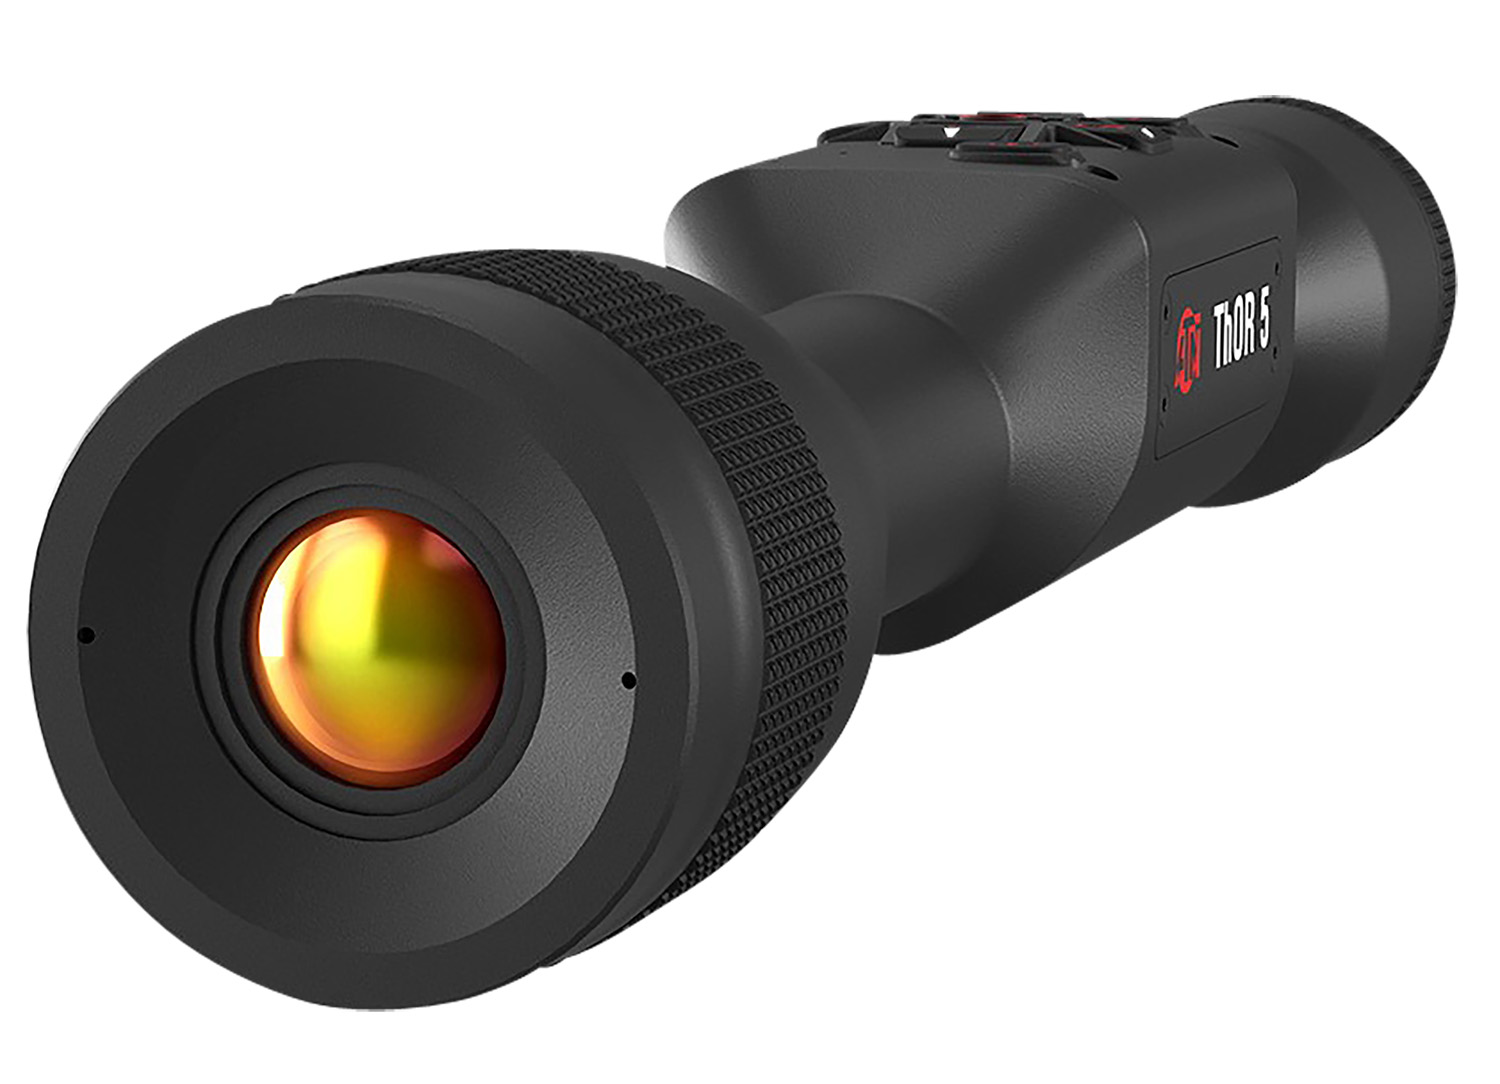 ATN TIWST5325A Thor 5 320 Thermal Rifle Scope, Black Anodized 4-16X Smart Mil Dot Reticle W/Zoom 320X240, 12 Microns 60 